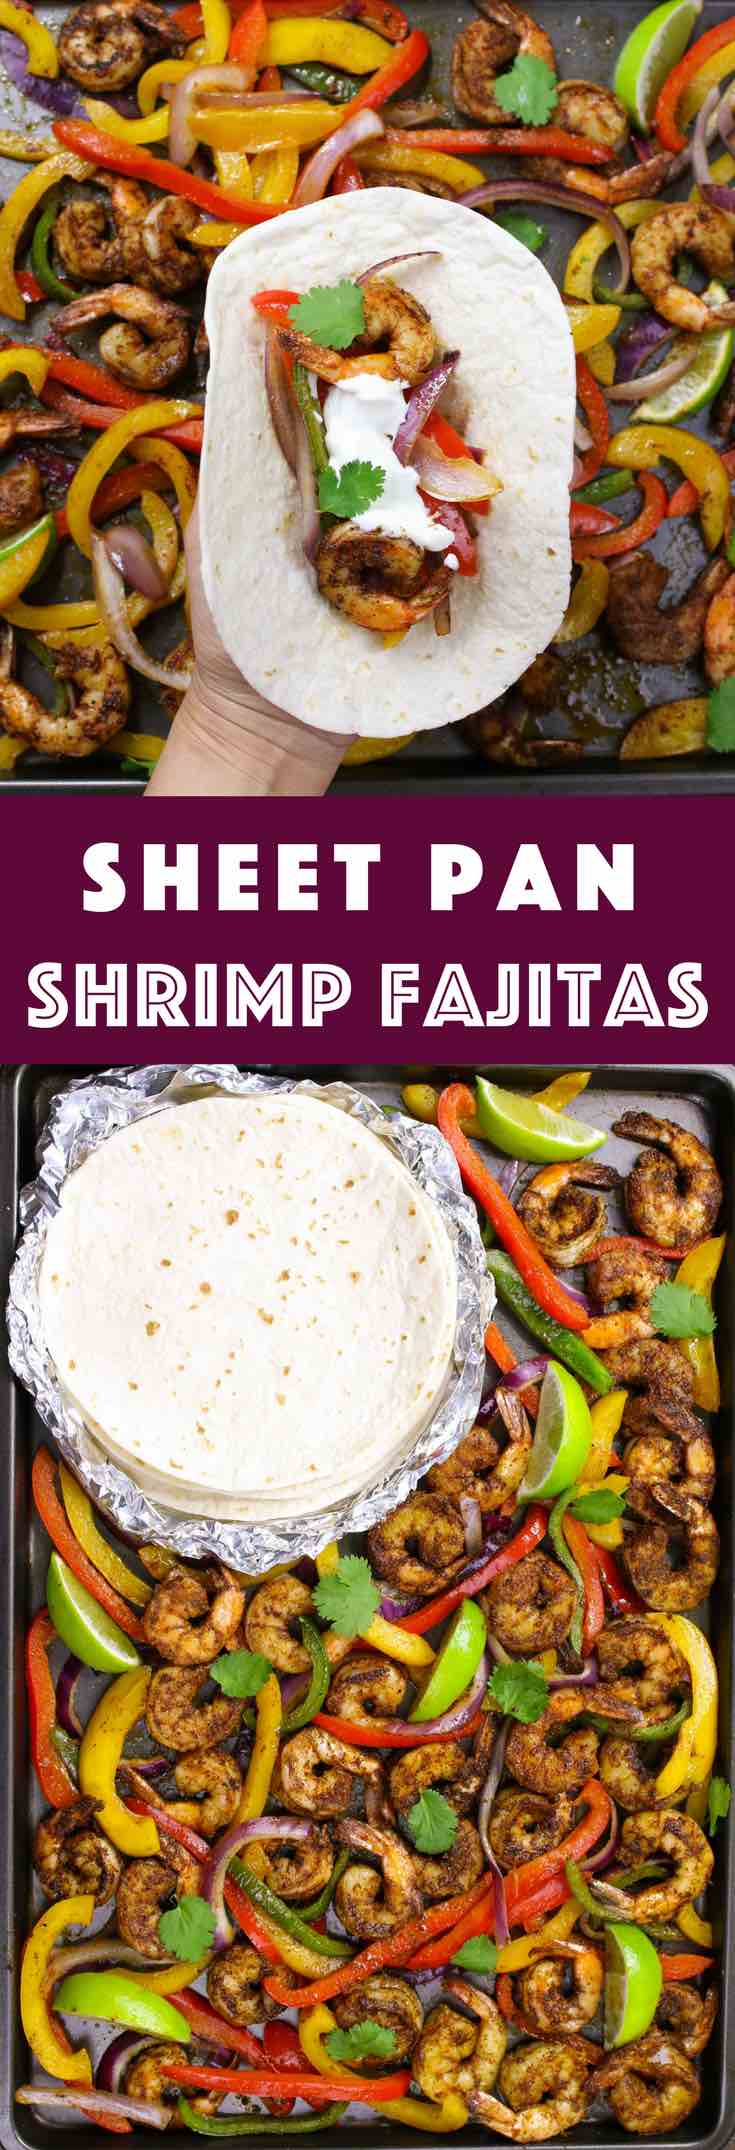 These Baked Shrimp Fajitas is an easy one pan meal with gorgeously browned and sizzling shrimp mixed with delicious vegetables cooked with fajita seasonings. It tastes amazing and takes only 20 minutes to make. #shrimpFajitas